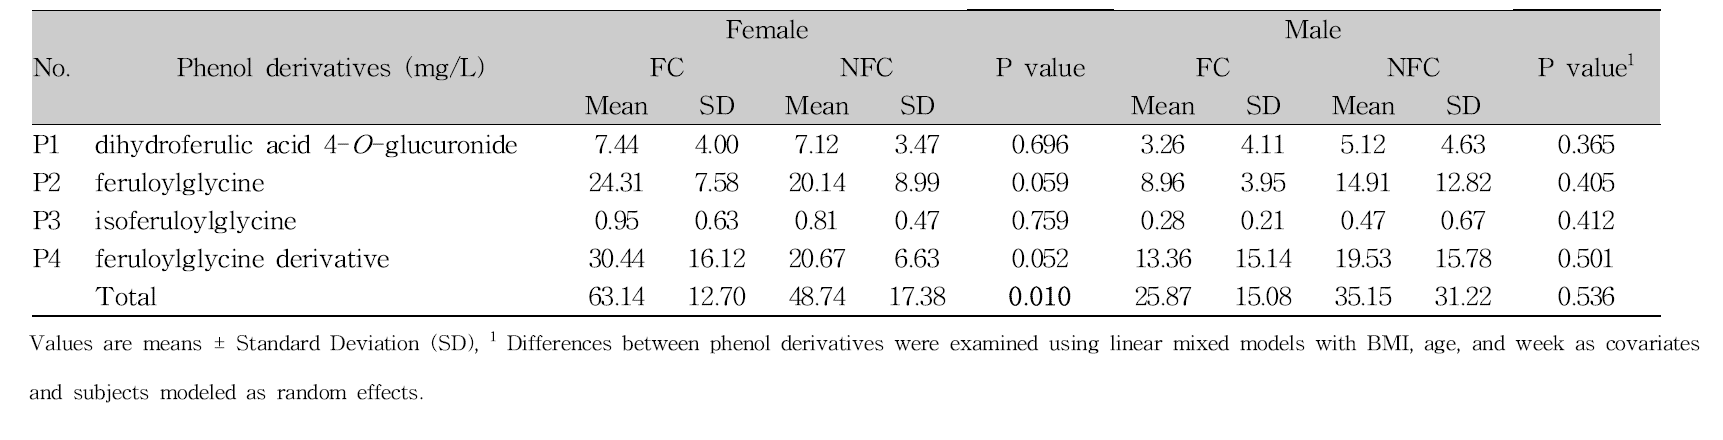 The gender difference of the phenol derivatives in 24h urine collected during fermented cabbage (FC) and non-fermented cabbage (NFC) intake